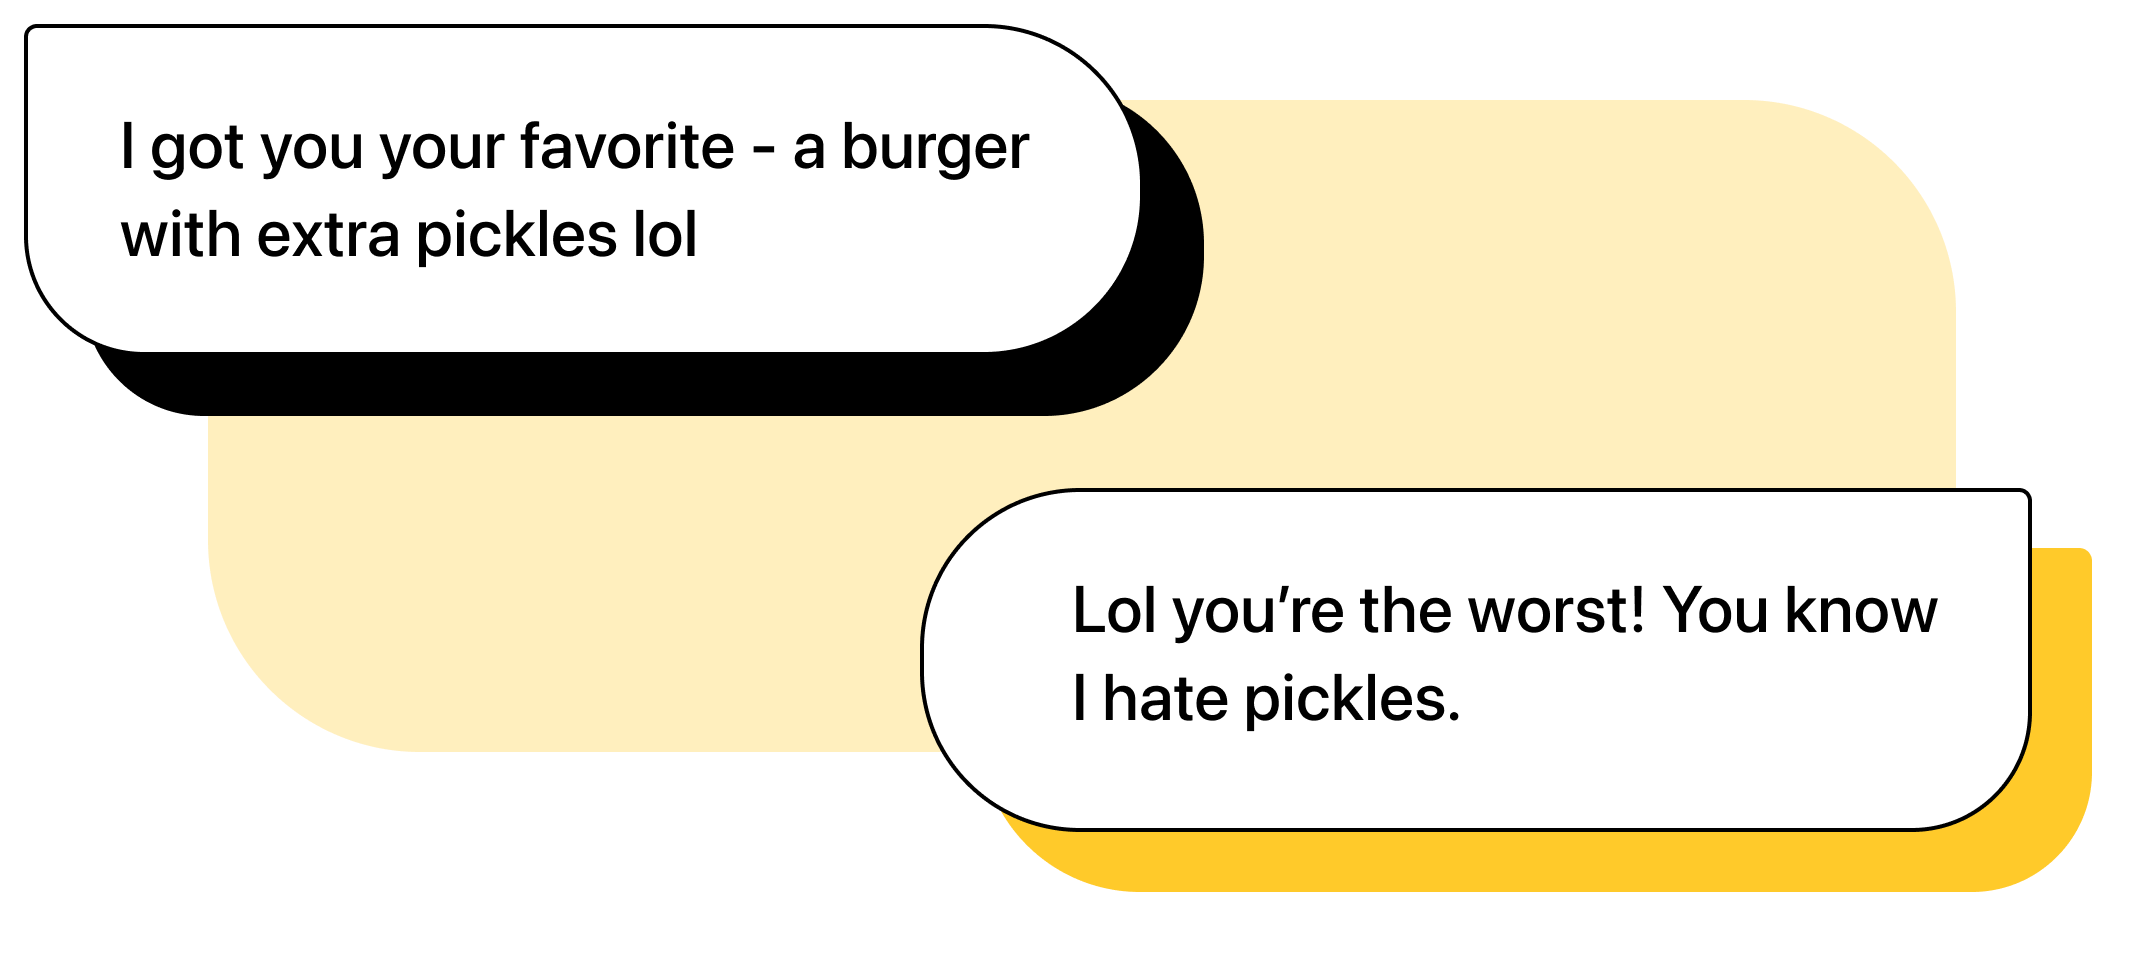 Two chat bubbles graphics. First message: "I got you your favorite - a burget with extra pickles lol". Second message: "Lol you're the worst! You know I hate pickles."